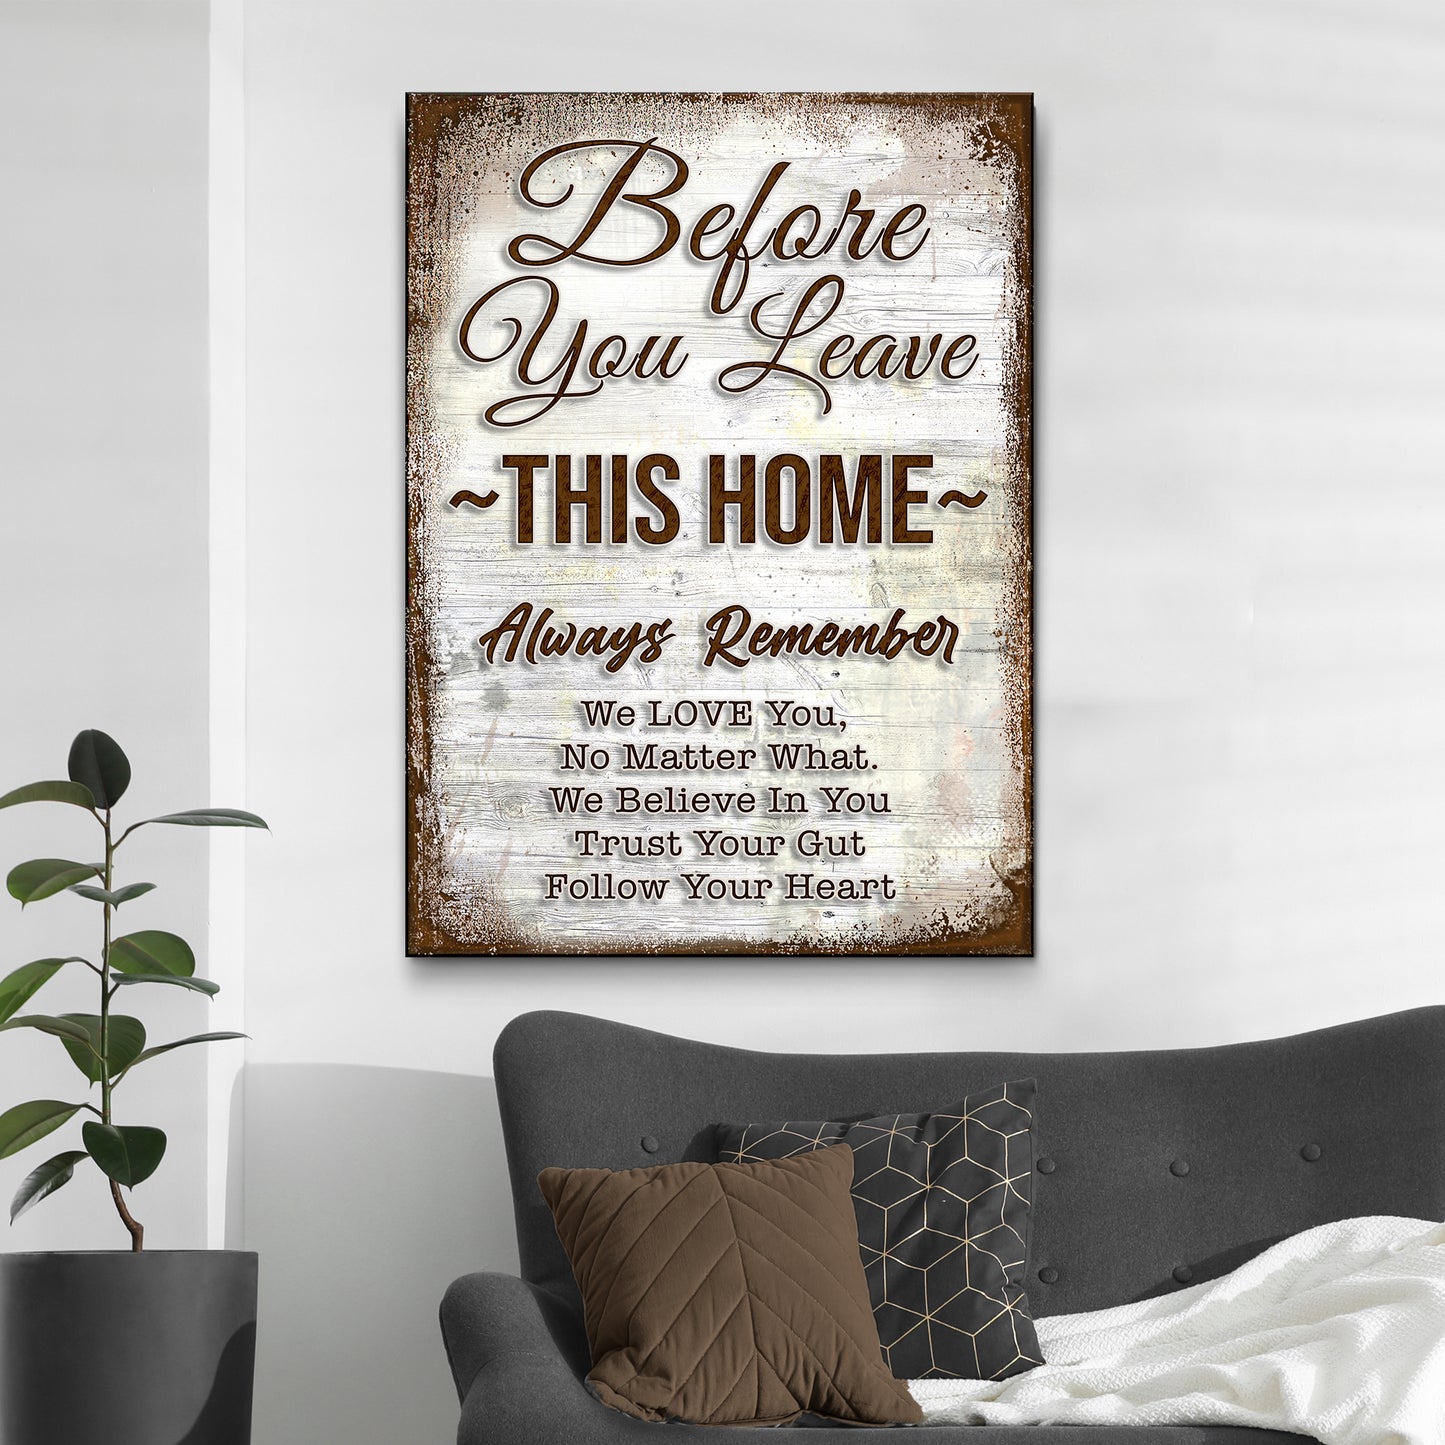 Before You Leave This Home Sign II - Image by Tailored Canvases